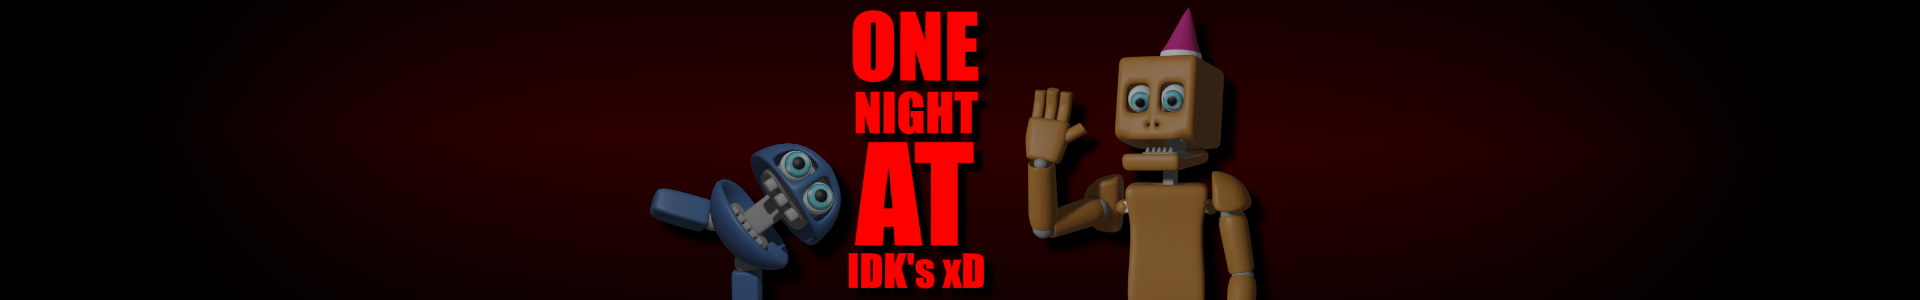 One Night At IDK's